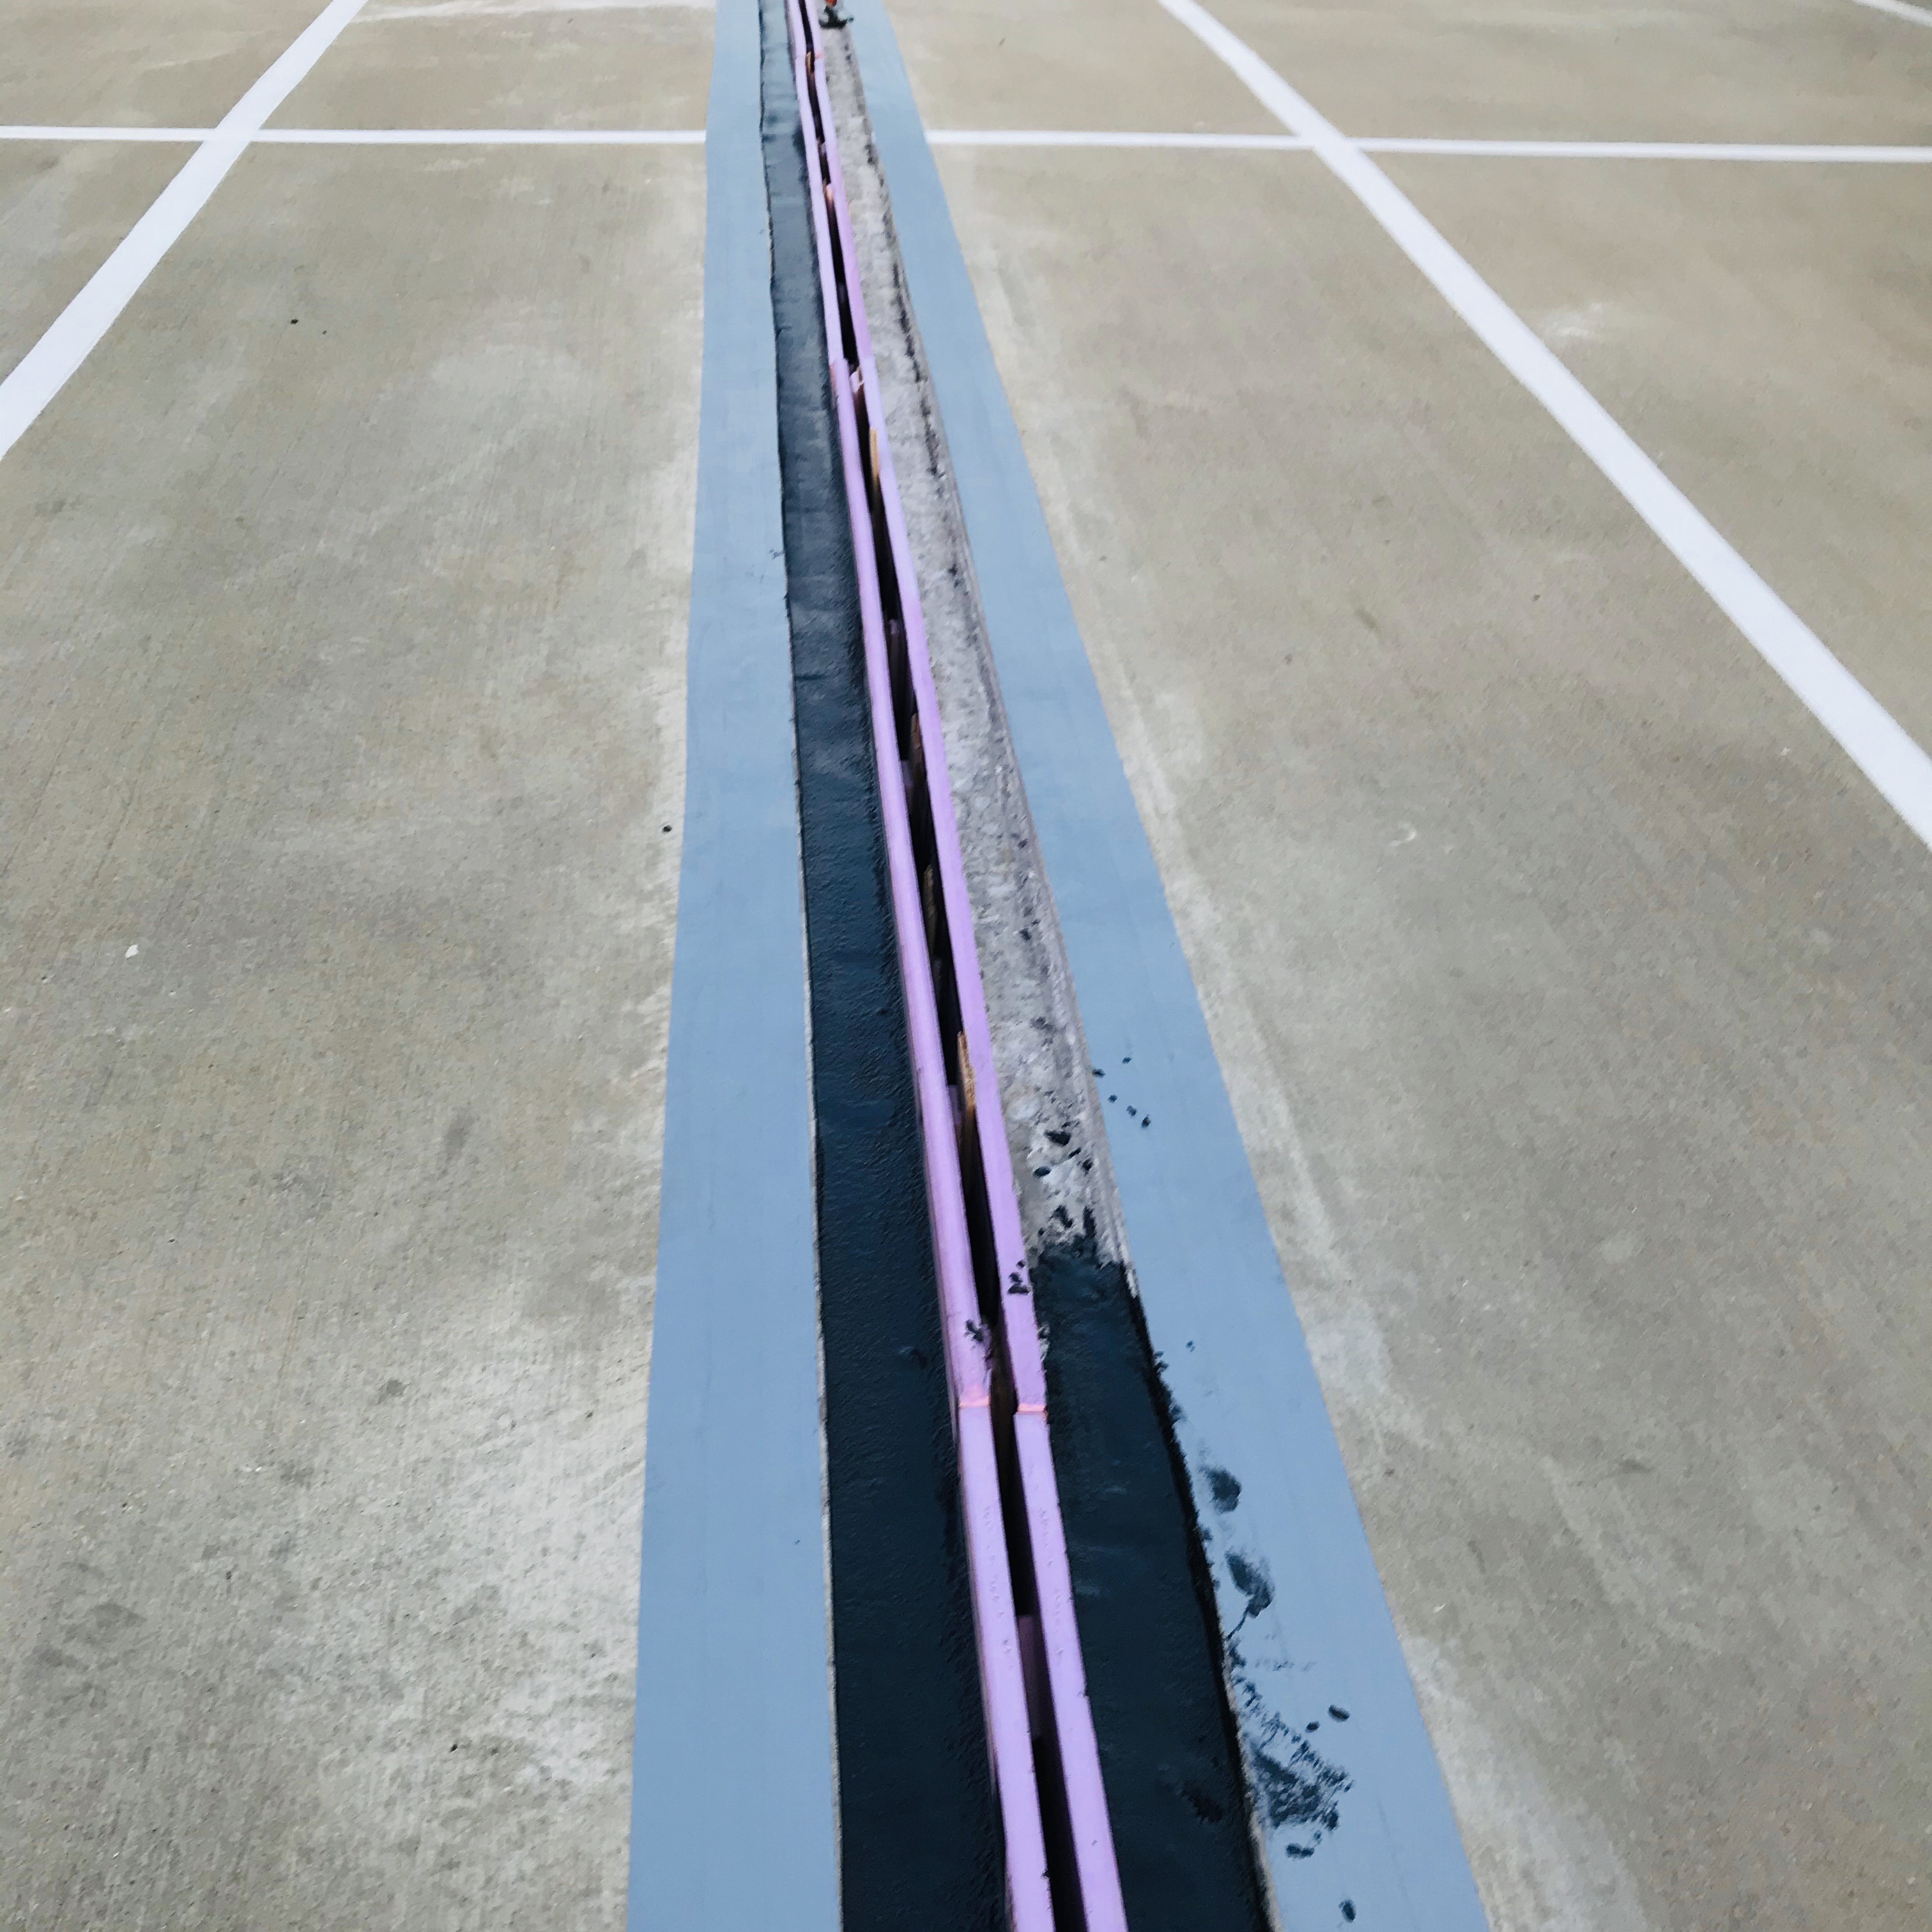 DURING Expansion Joint Repair